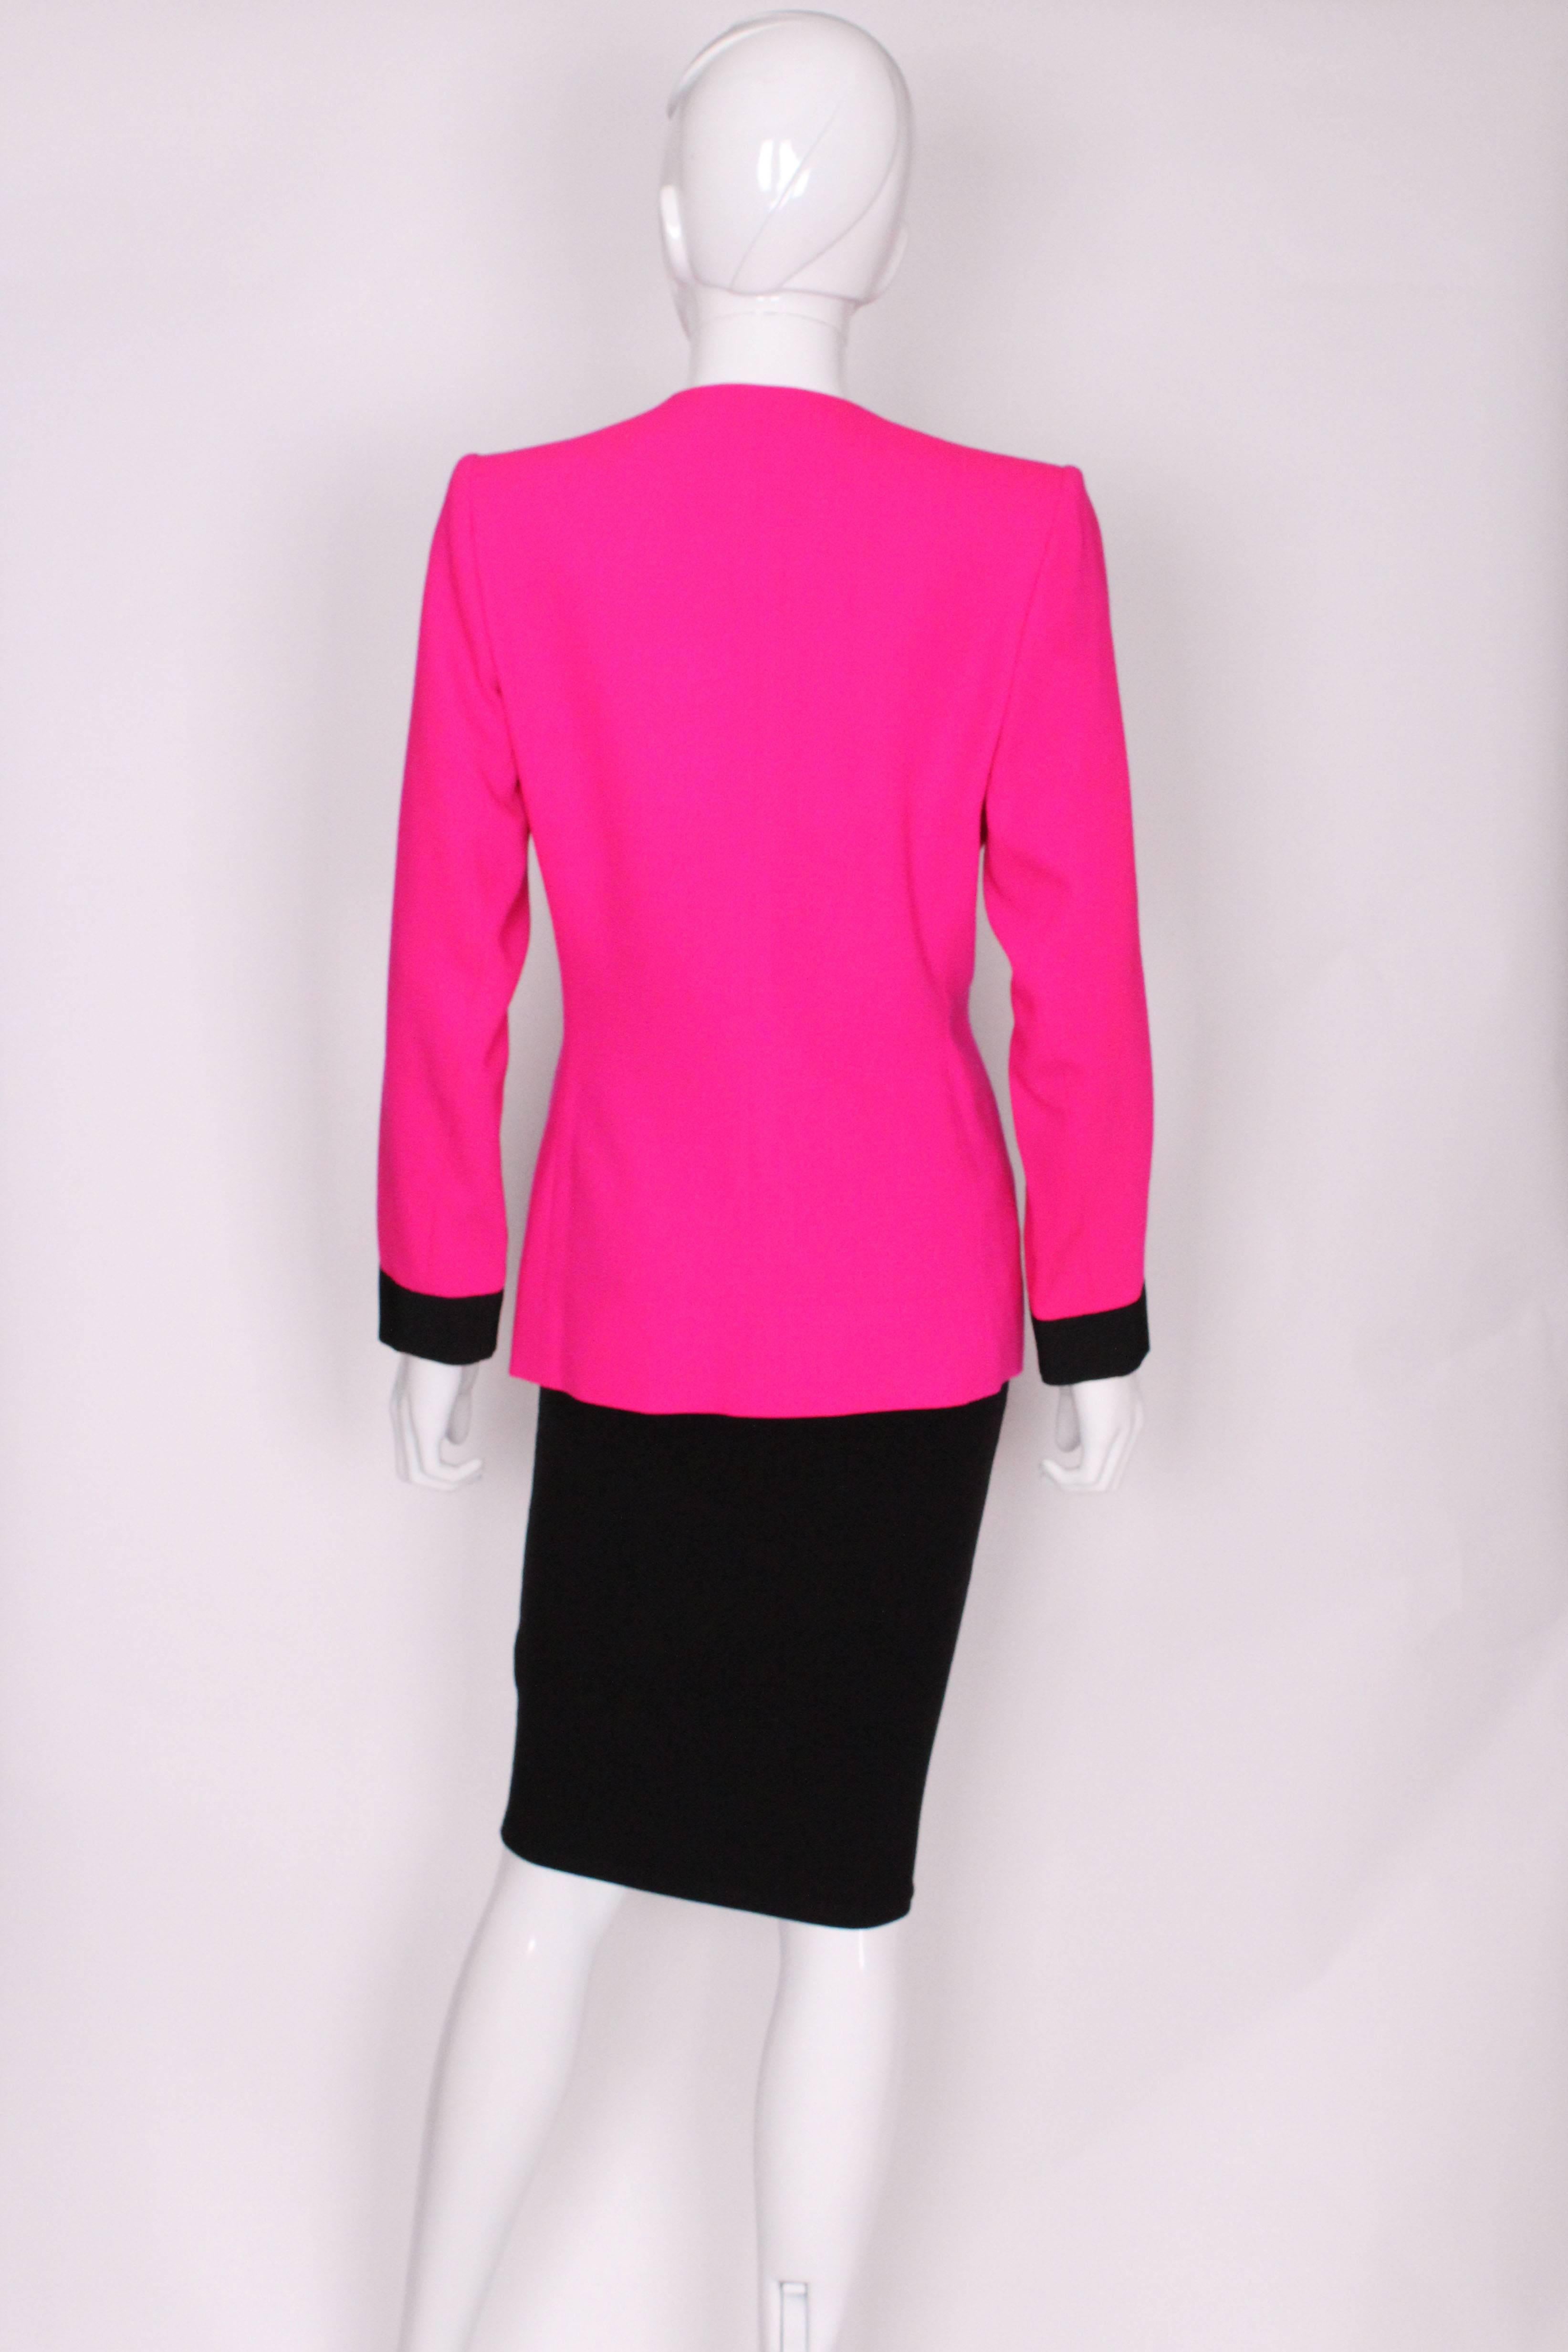 1980s YSL Pink and Black Jacket 2